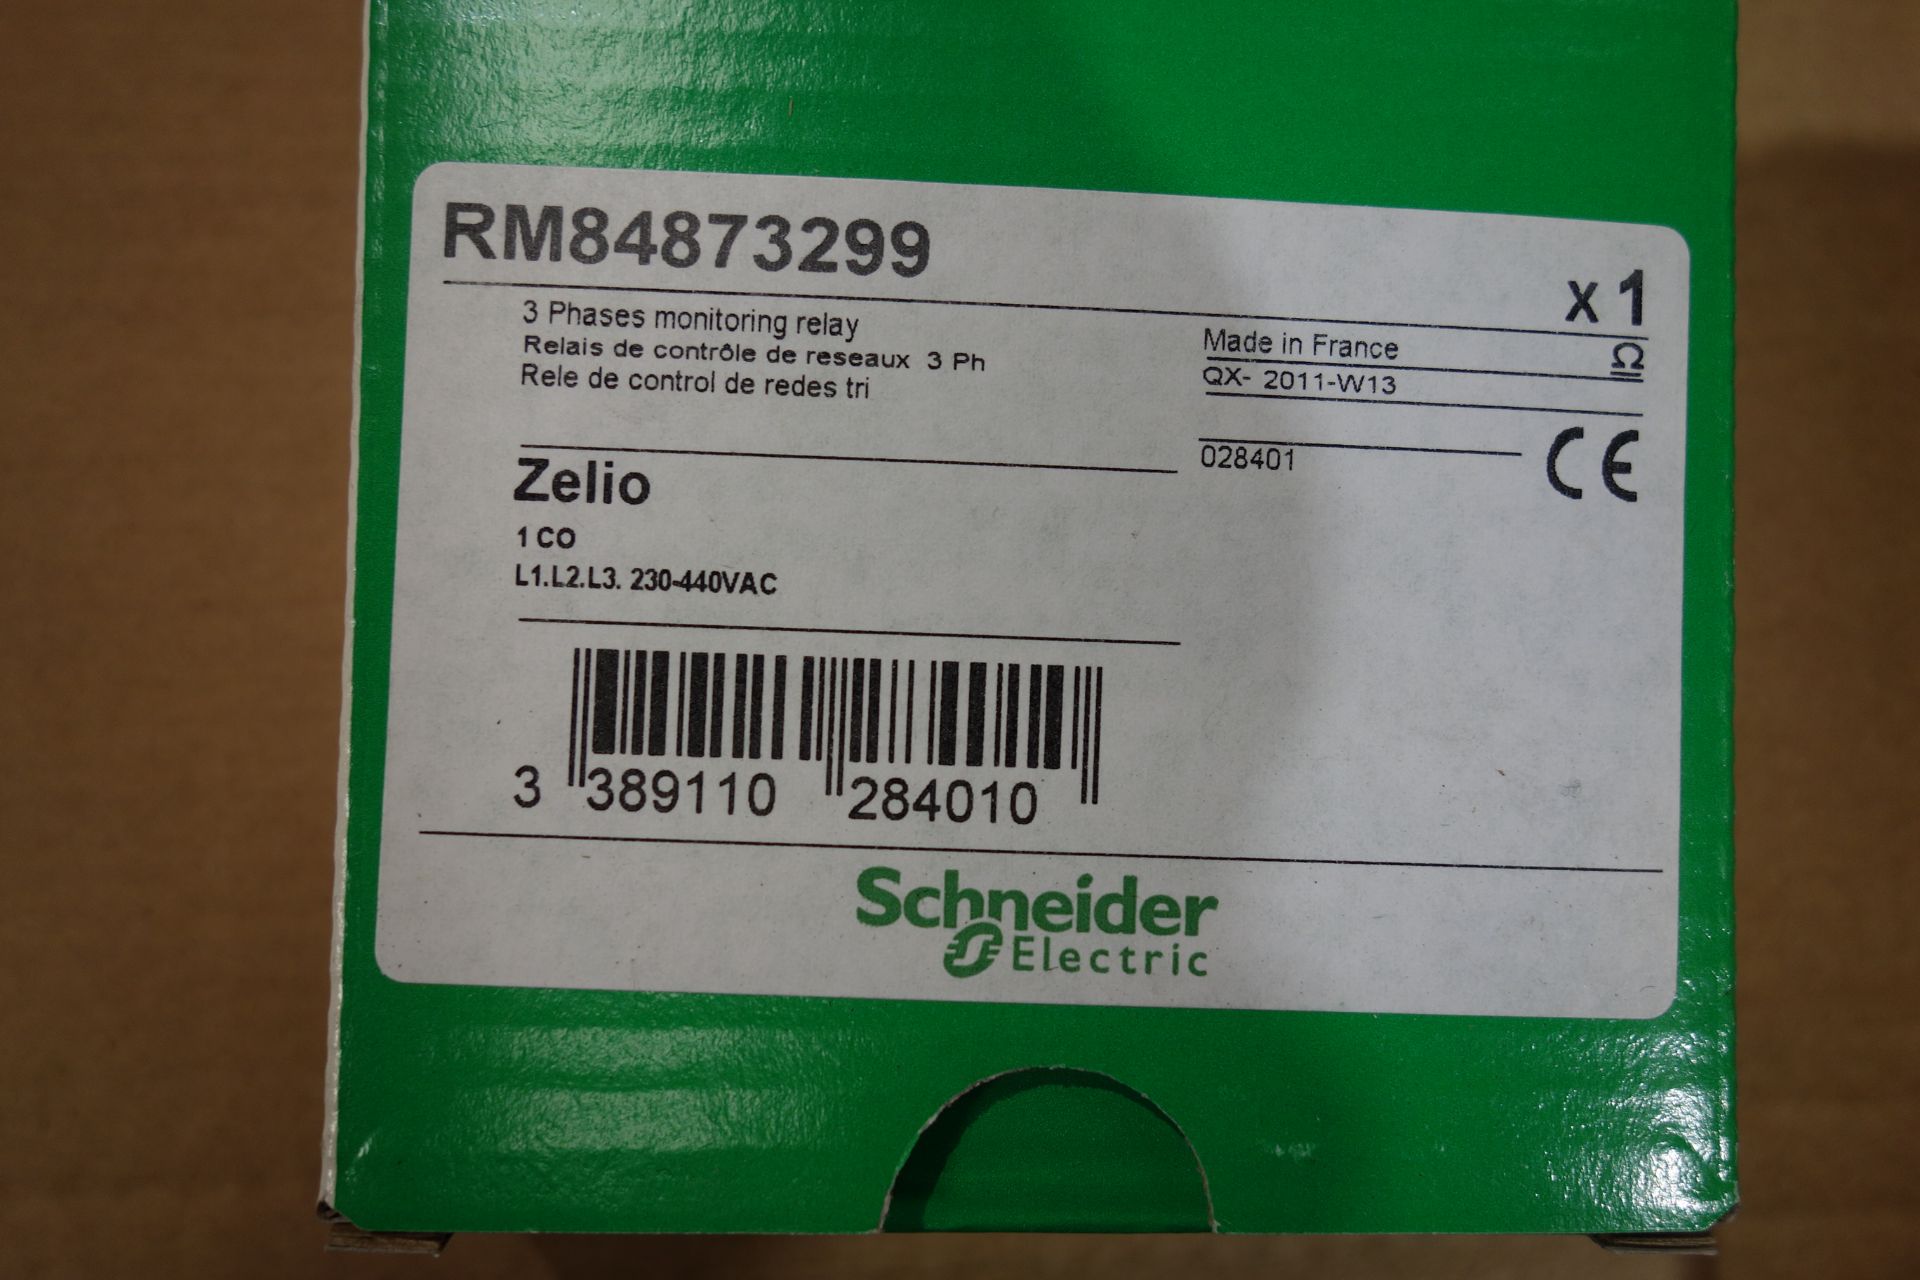 12 X Schneider RM84873299 3 Phases Monitoring Relay